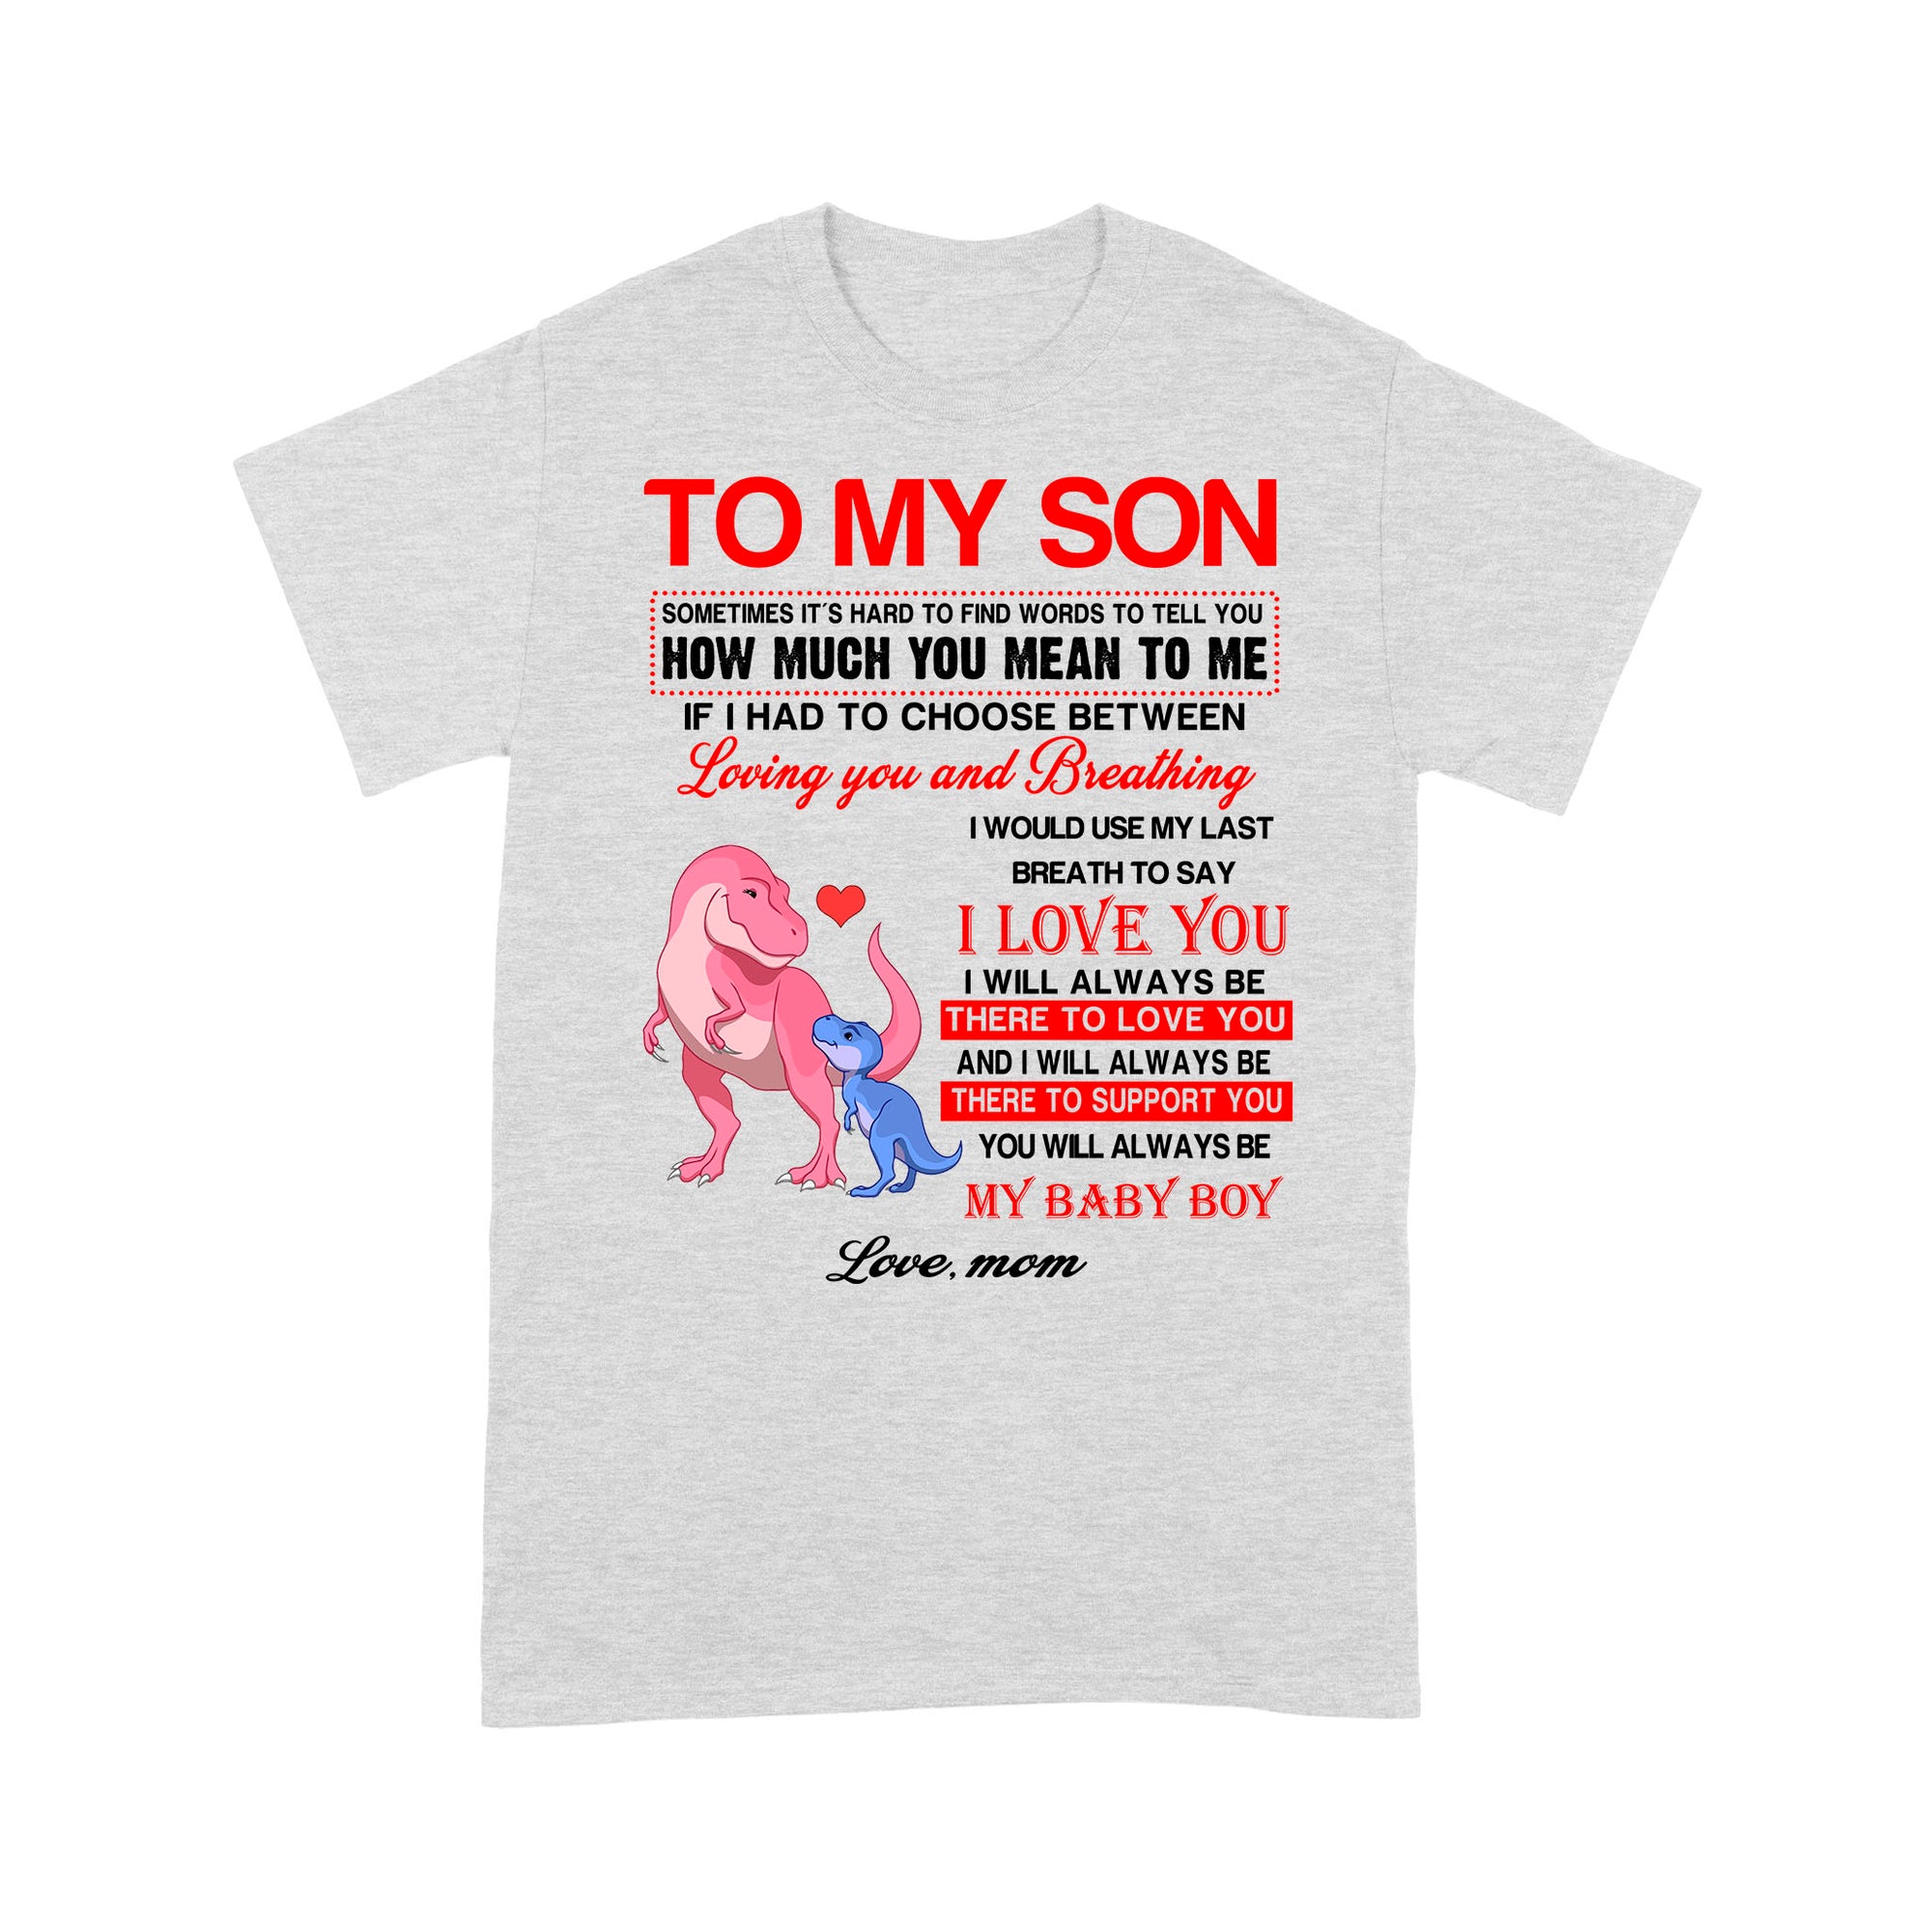 To My Son Sometimes It’s Hard To Find Words To Tell You How Much You Mean To Me, Mamasaurus - Standard T-Shirt